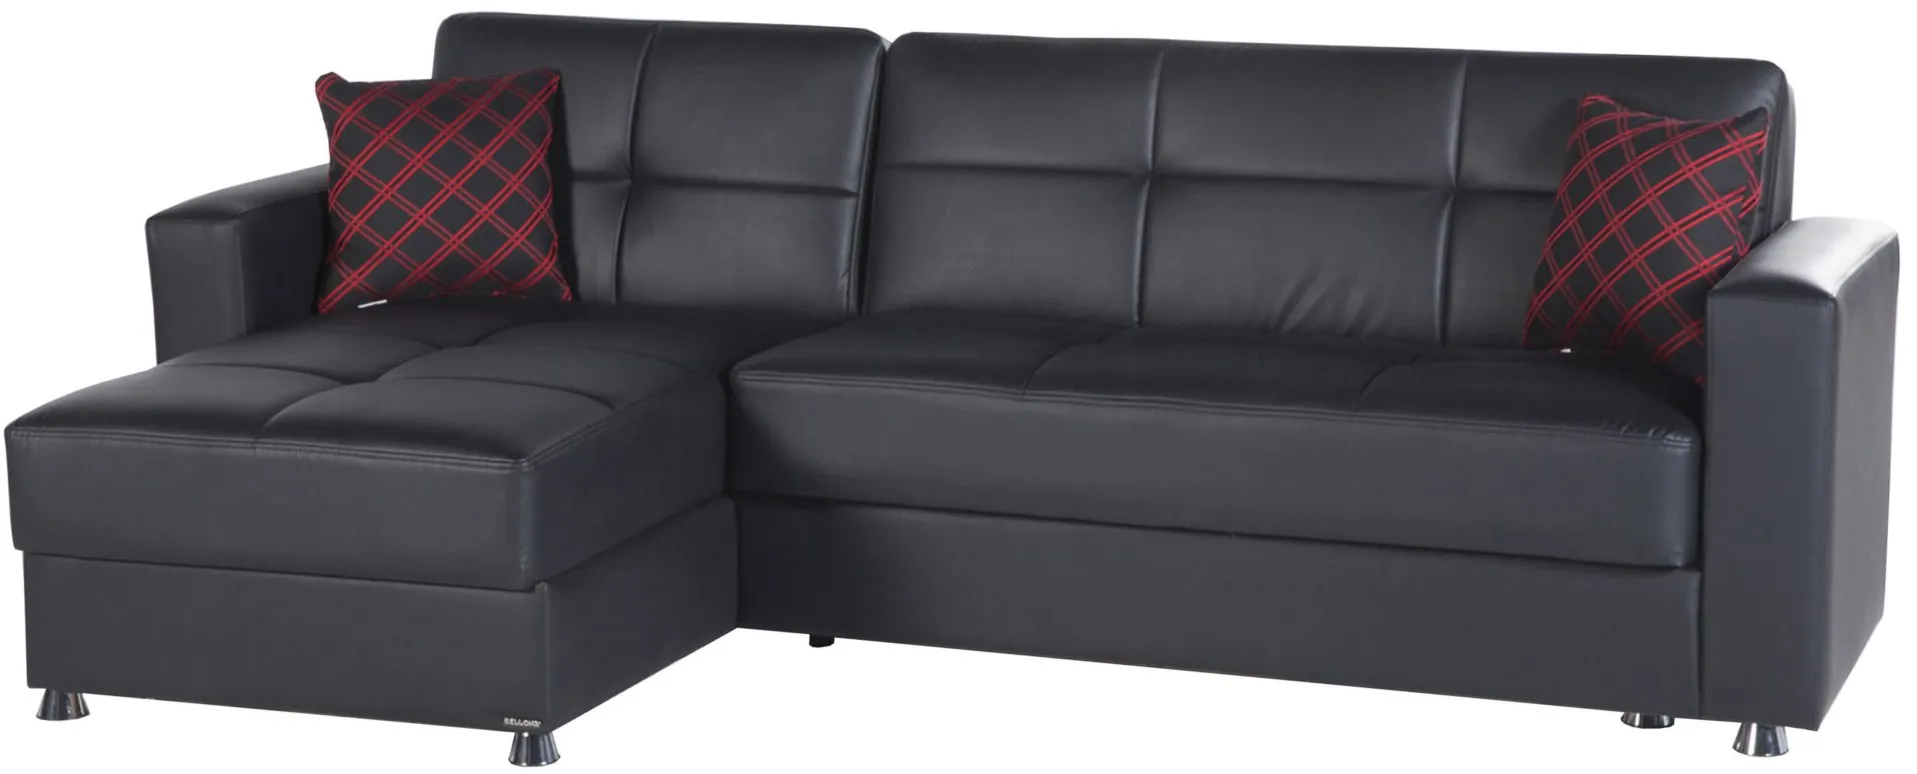 Aracely 2-pc.. Reversible Sectional Sofa in Black by HUDSON GLOBAL MARKETING USA